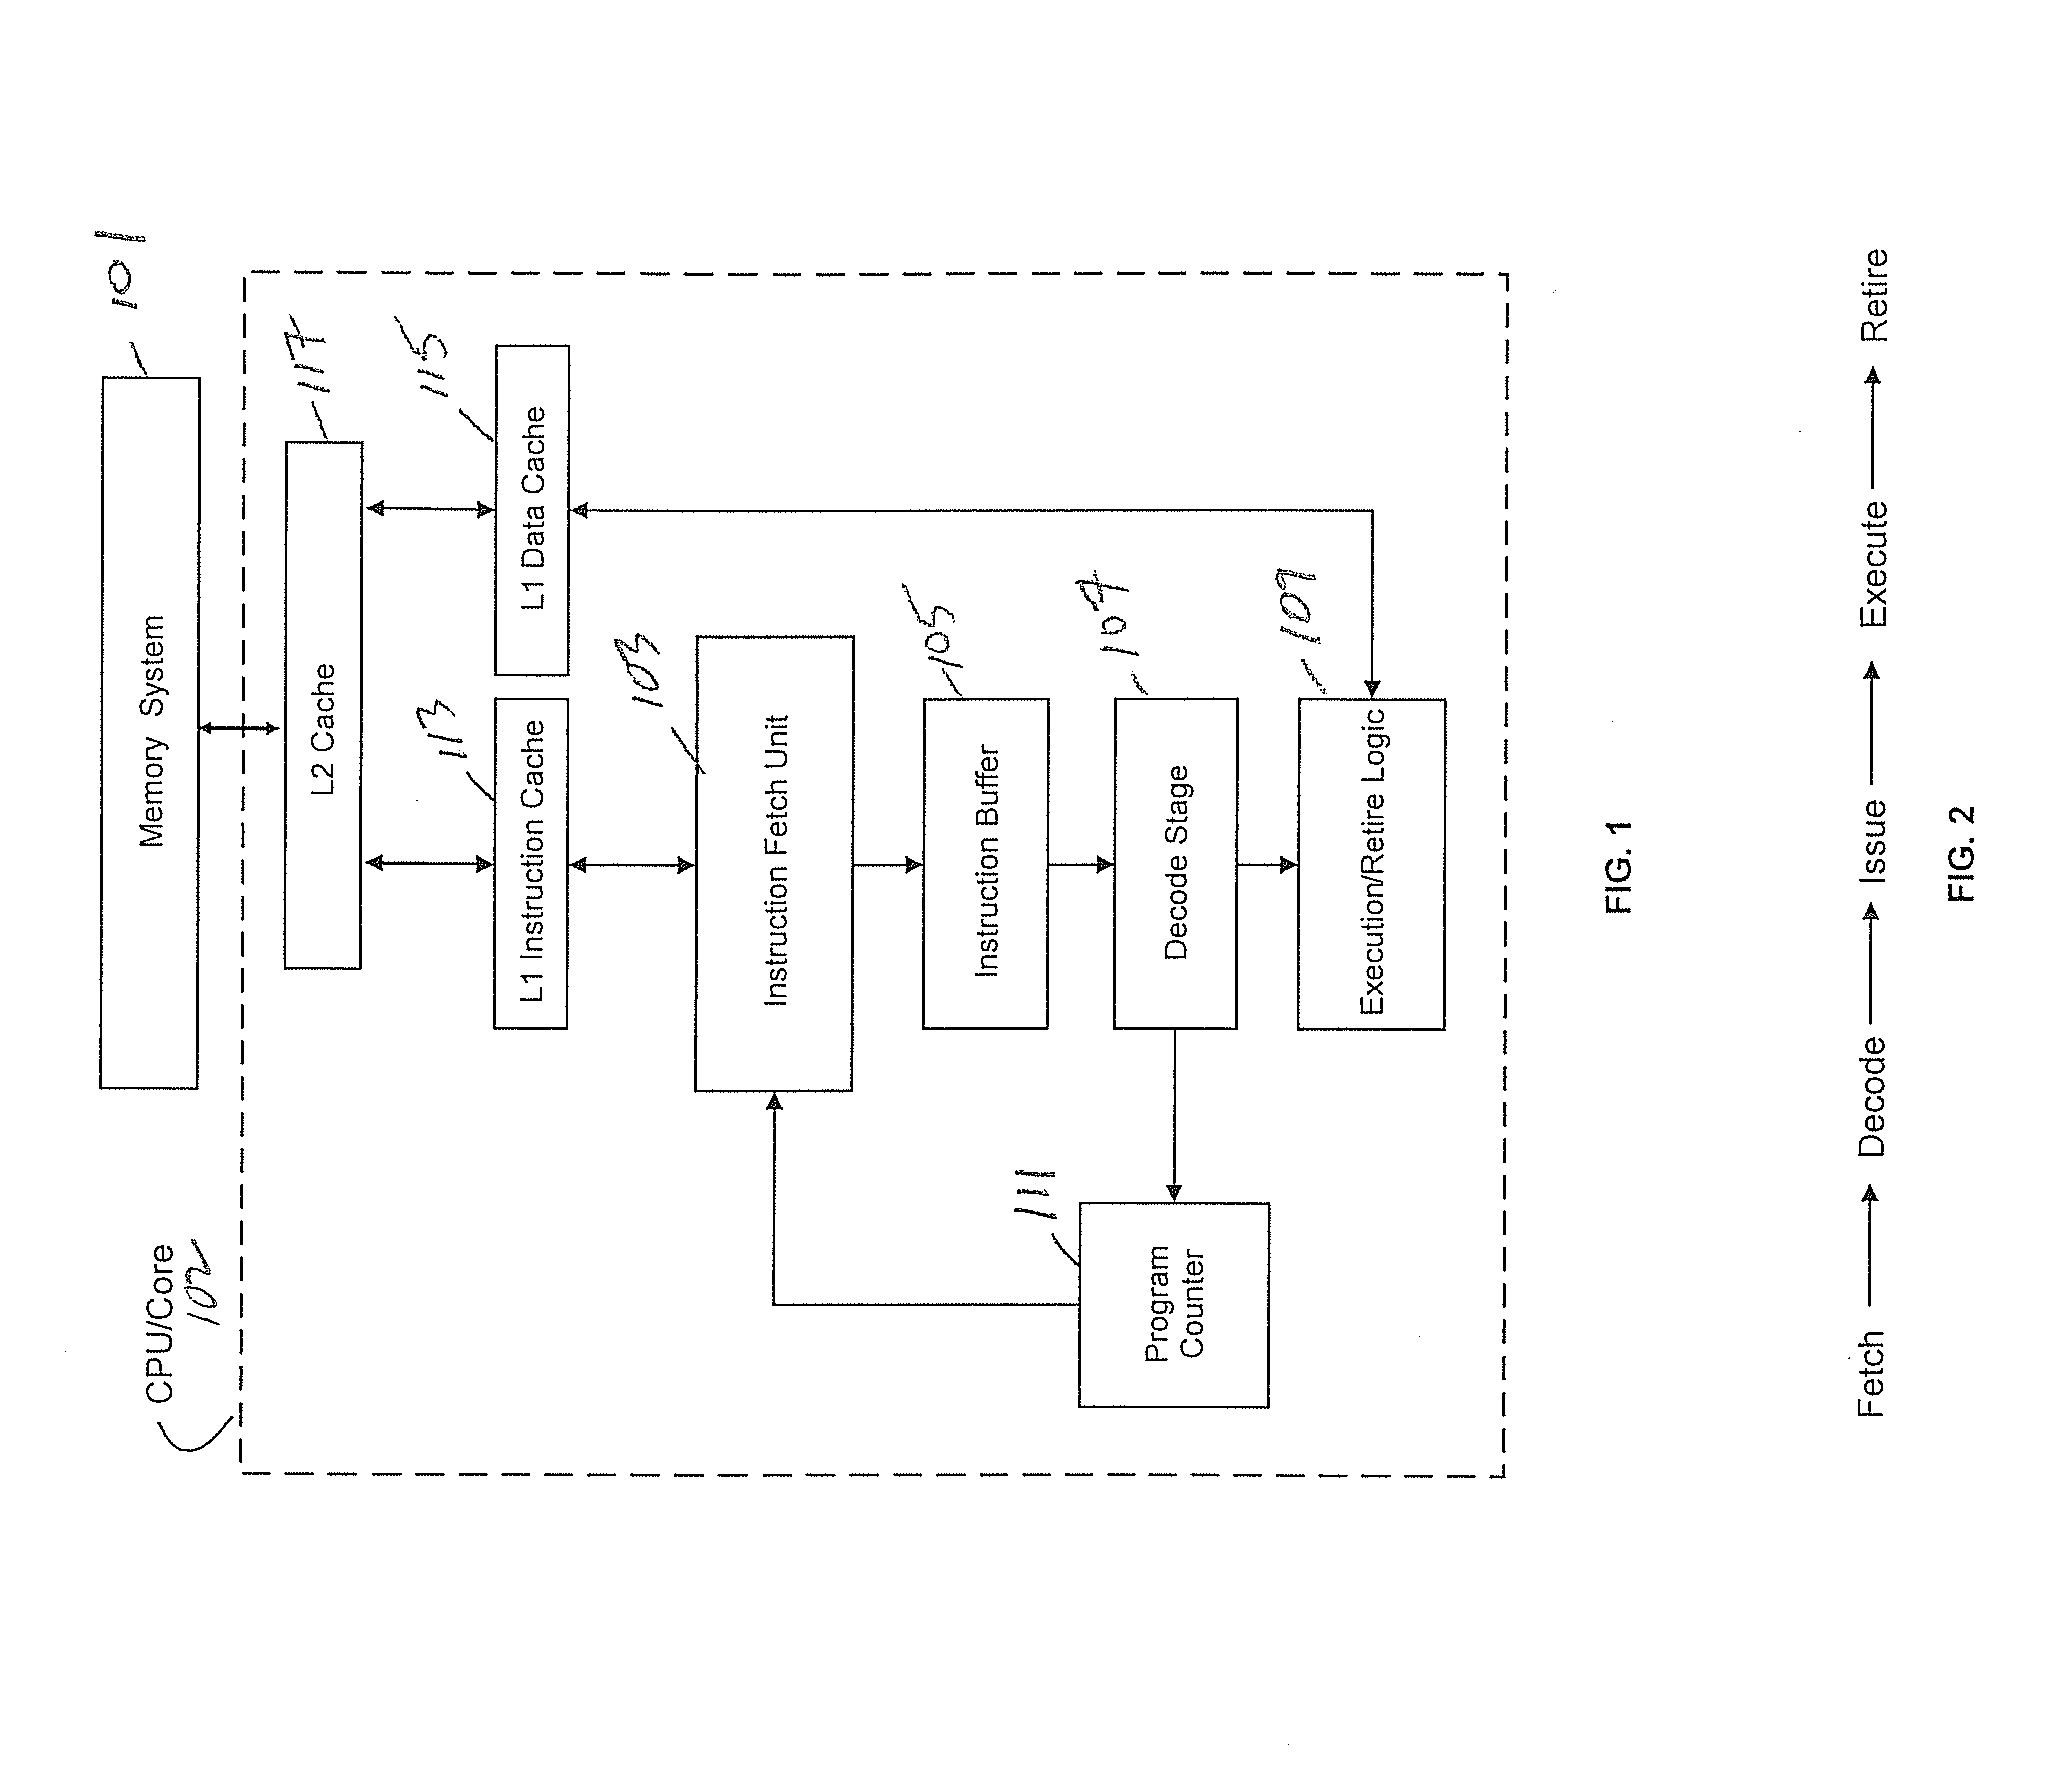 Computer Processor Employing Cache Memory Storing Backless Cache Lines